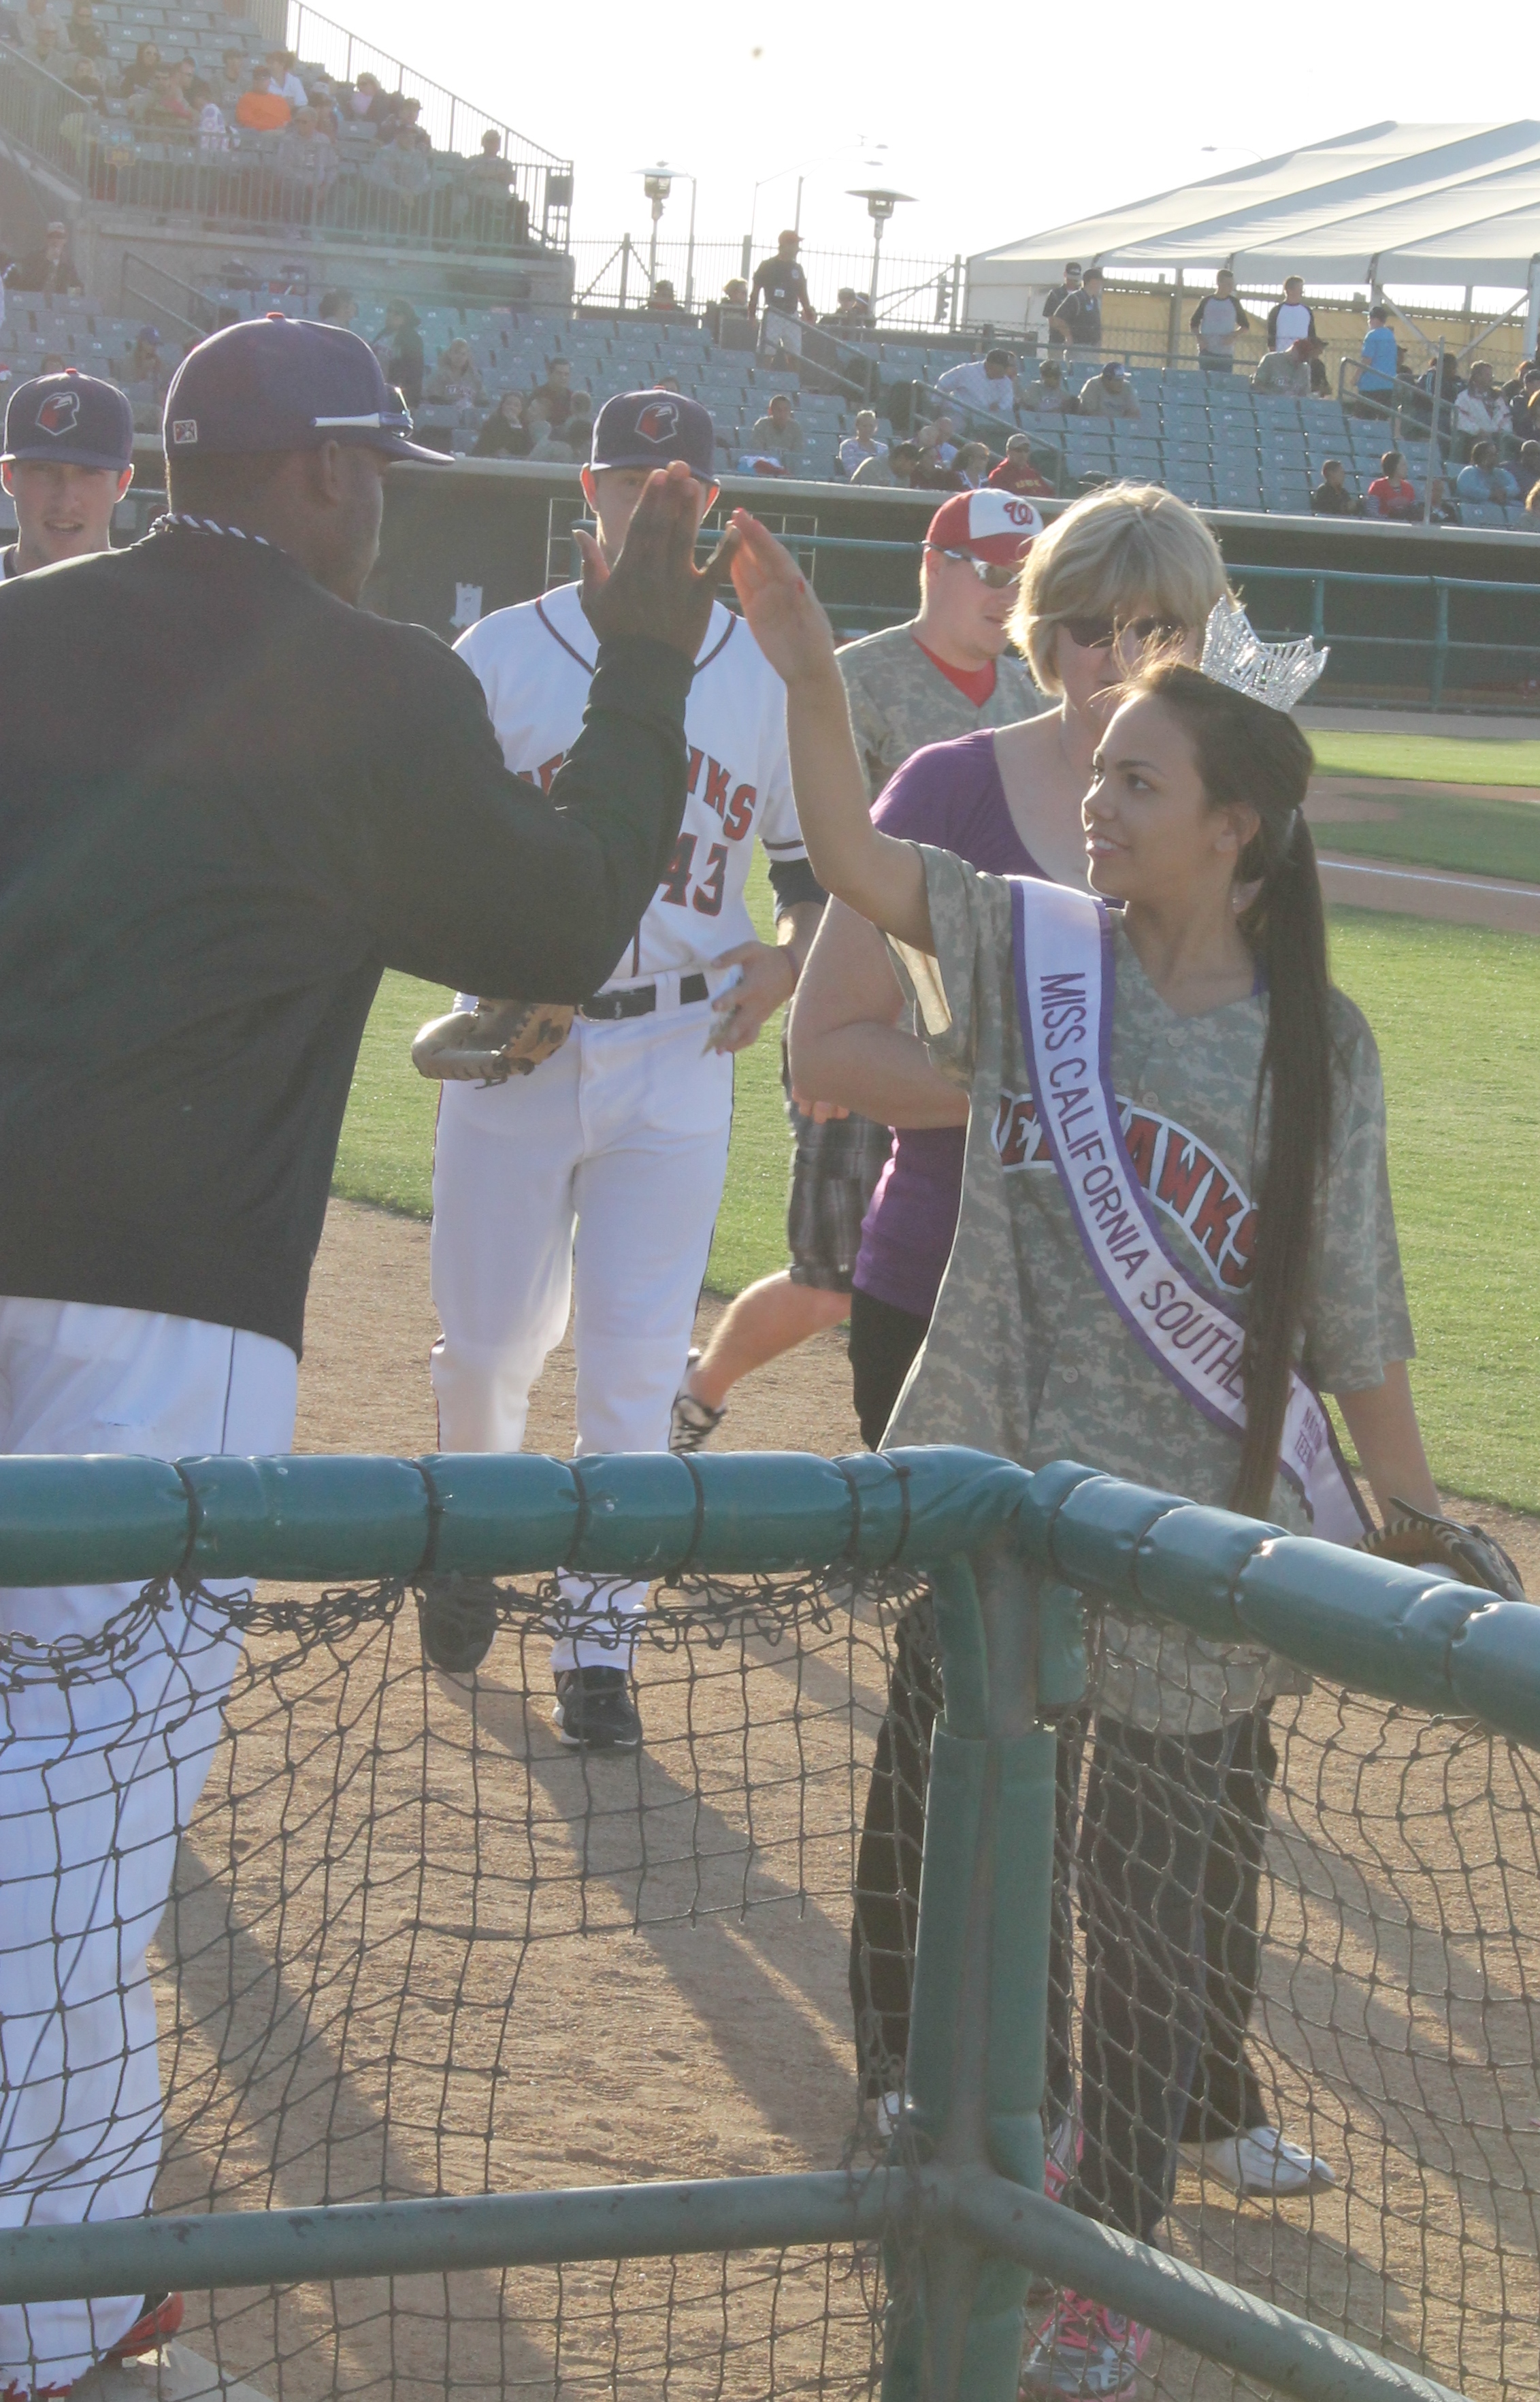 Miss California Southern National Teenager at the Jet Hawks Stadium during the first pitch